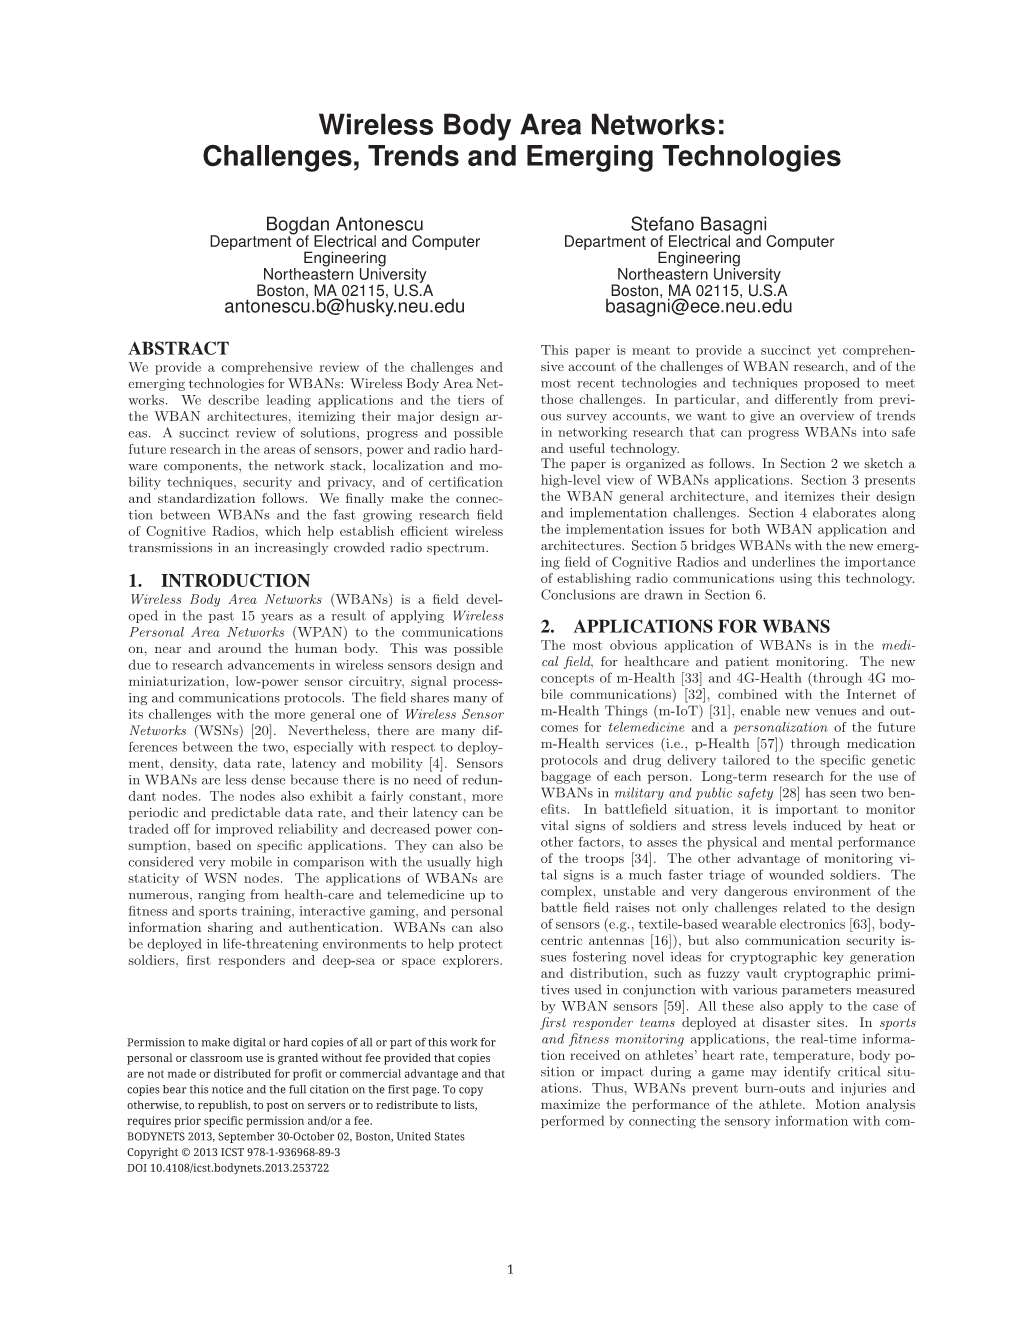 Wireless Body Area Networks: Challenges, Trends and Emerging Technologies